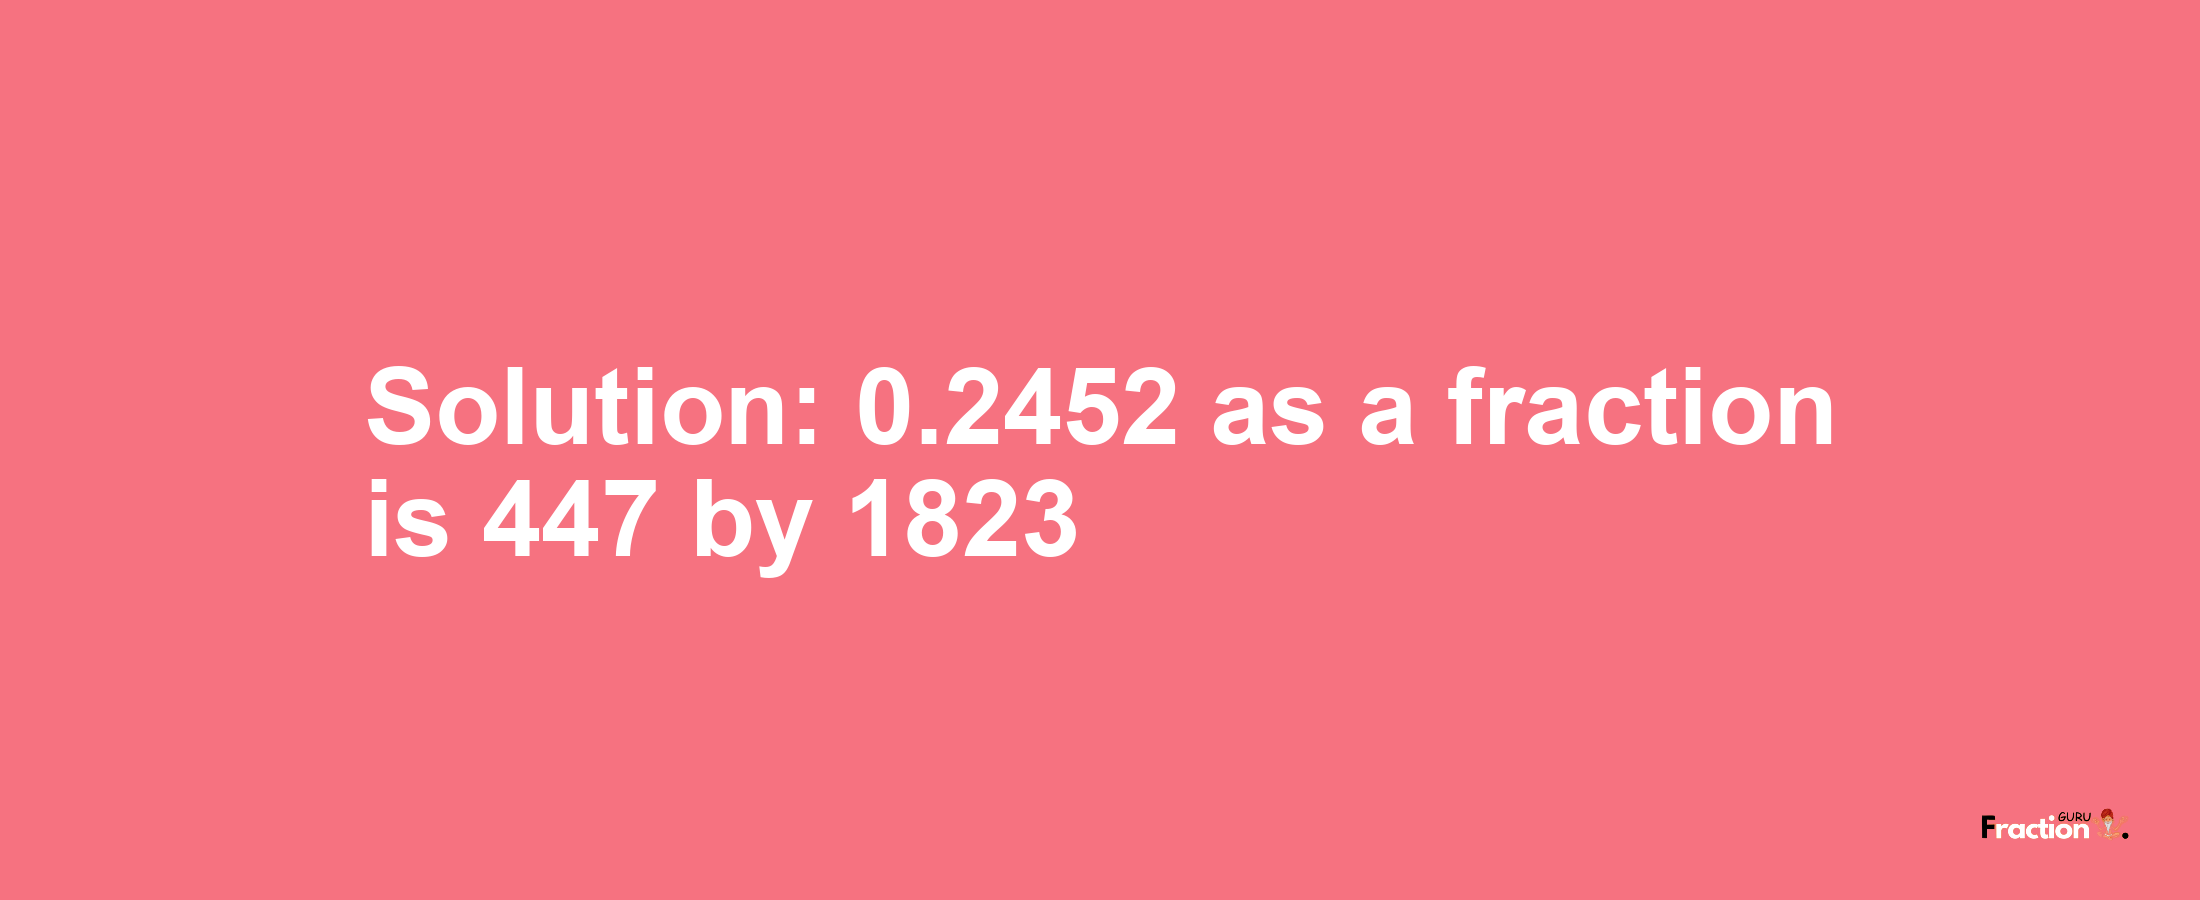 Solution:0.2452 as a fraction is 447/1823